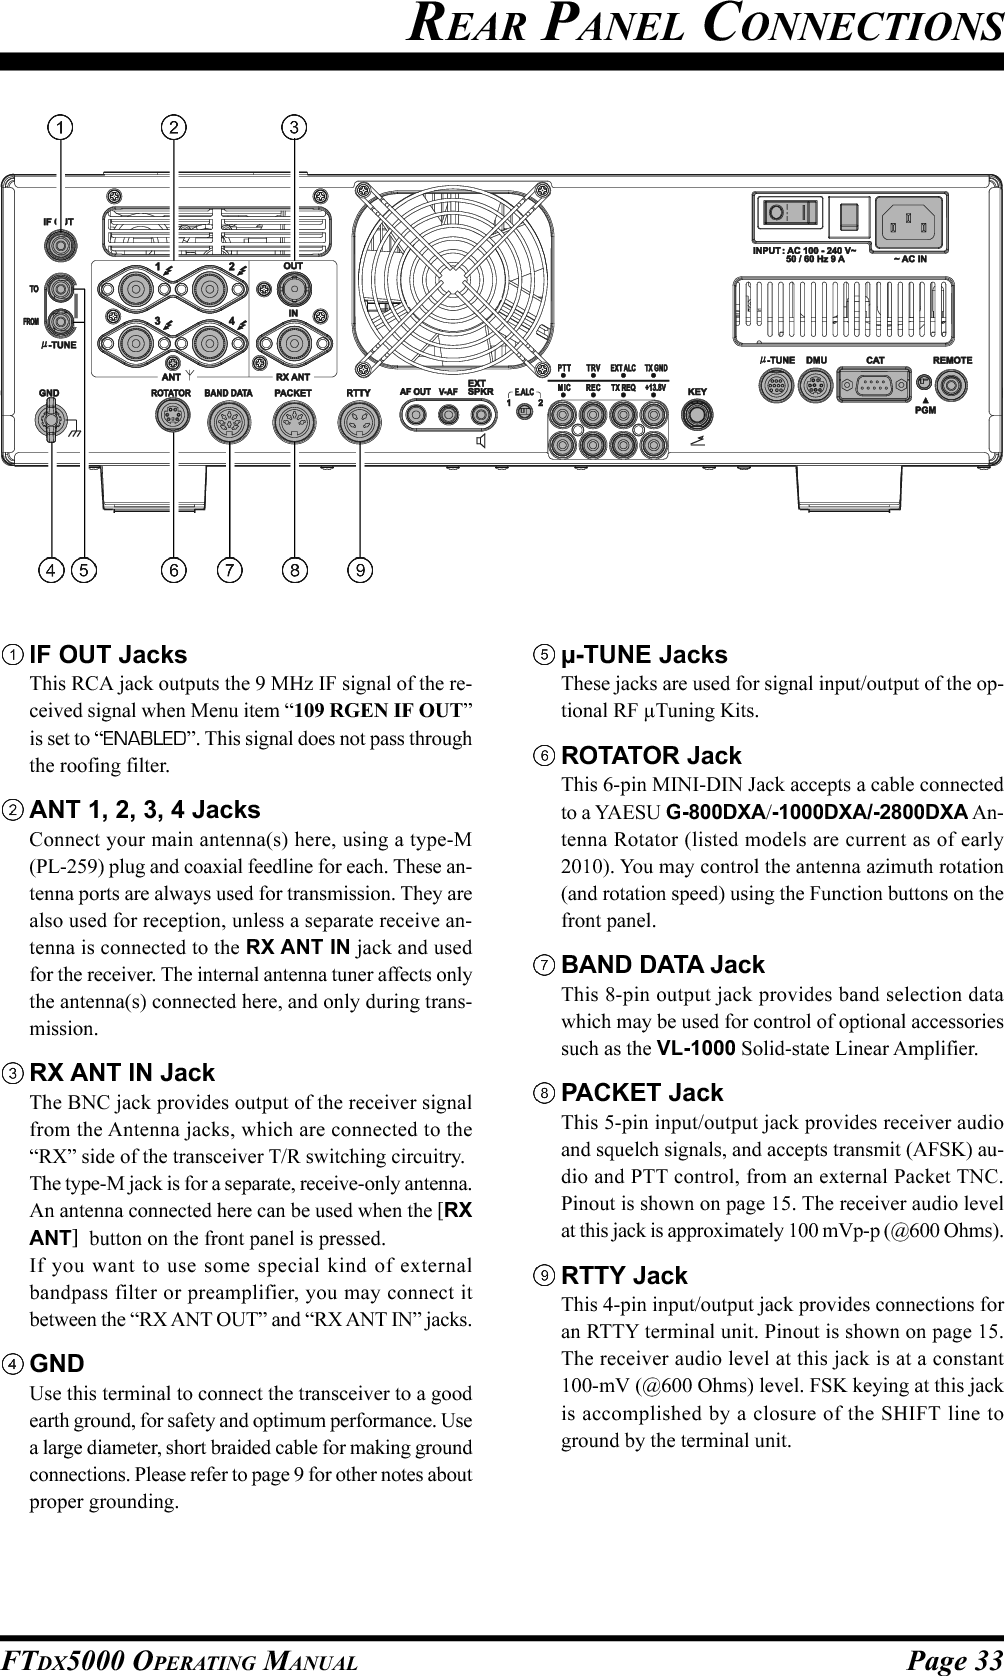 Page 33FTDX5000 OPERATING MANUALREAR PANEL CONNECTIONSIF OUT JacksThis RCA jack outputs the 9 MHz IF signal of the re-ceived signal when Menu item “109 RGEN IF OUT”is set to “ENABLED”. This signal does not pass throughthe roofing filter.ANT 1, 2, 3, 4 JacksConnect your main antenna(s) here, using a type-M(PL-259) plug and coaxial feedline for each. These an-tenna ports are always used for transmission. They arealso used for reception, unless a separate receive an-tenna is connected to the RX ANT IN jack and usedfor the receiver. The internal antenna tuner affects onlythe antenna(s) connected here, and only during trans-mission.RX ANT IN JackThe BNC jack provides output of the receiver signalfrom the Antenna jacks, which are connected to the“RX” side of the transceiver T/R switching circuitry.The type-M jack is for a separate, receive-only antenna.An antenna connected here can be used when the [RXANT]  button on the front panel is pressed.If you want to use some special kind of externalbandpass filter or preamplifier, you may connect itbetween the “RX ANT OUT” and “RX ANT IN” jacks.GNDUse this terminal to connect the transceiver to a goodearth ground, for safety and optimum performance. Usea large diameter, short braided cable for making groundconnections. Please refer to page 9 for other notes aboutproper grounding.µ-TUNE JacksThese jacks are used for signal input/output of the op-tional RF µTuning Kits.ROTATOR JackThis 6-pin MINI-DIN Jack accepts a cable connectedto a YAESU G-800DXA/-1000DXA/-2800DXA An-tenna Rotator (listed models are current as of early2010). You may control the antenna azimuth rotation(and rotation speed) using the Function buttons on thefront panel.BAND DATA JackThis 8-pin output jack provides band selection datawhich may be used for control of optional accessoriessuch as the VL-1000 Solid-state Linear Amplifier.PACKET JackThis 5-pin input/output jack provides receiver audioand squelch signals, and accepts transmit (AFSK) au-dio and PTT control, from an external Packet TNC.Pinout is shown on page 15. The receiver audio levelat this jack is approximately 100 mVp-p (@600 Ohms).RTTY JackThis 4-pin input/output jack provides connections foran RTTY terminal unit. Pinout is shown on page 15.The receiver audio level at this jack is at a constant100-mV (@600 Ohms) level. FSK keying at this jackis accomplished by a closure of the SHIFT line toground by the terminal unit.